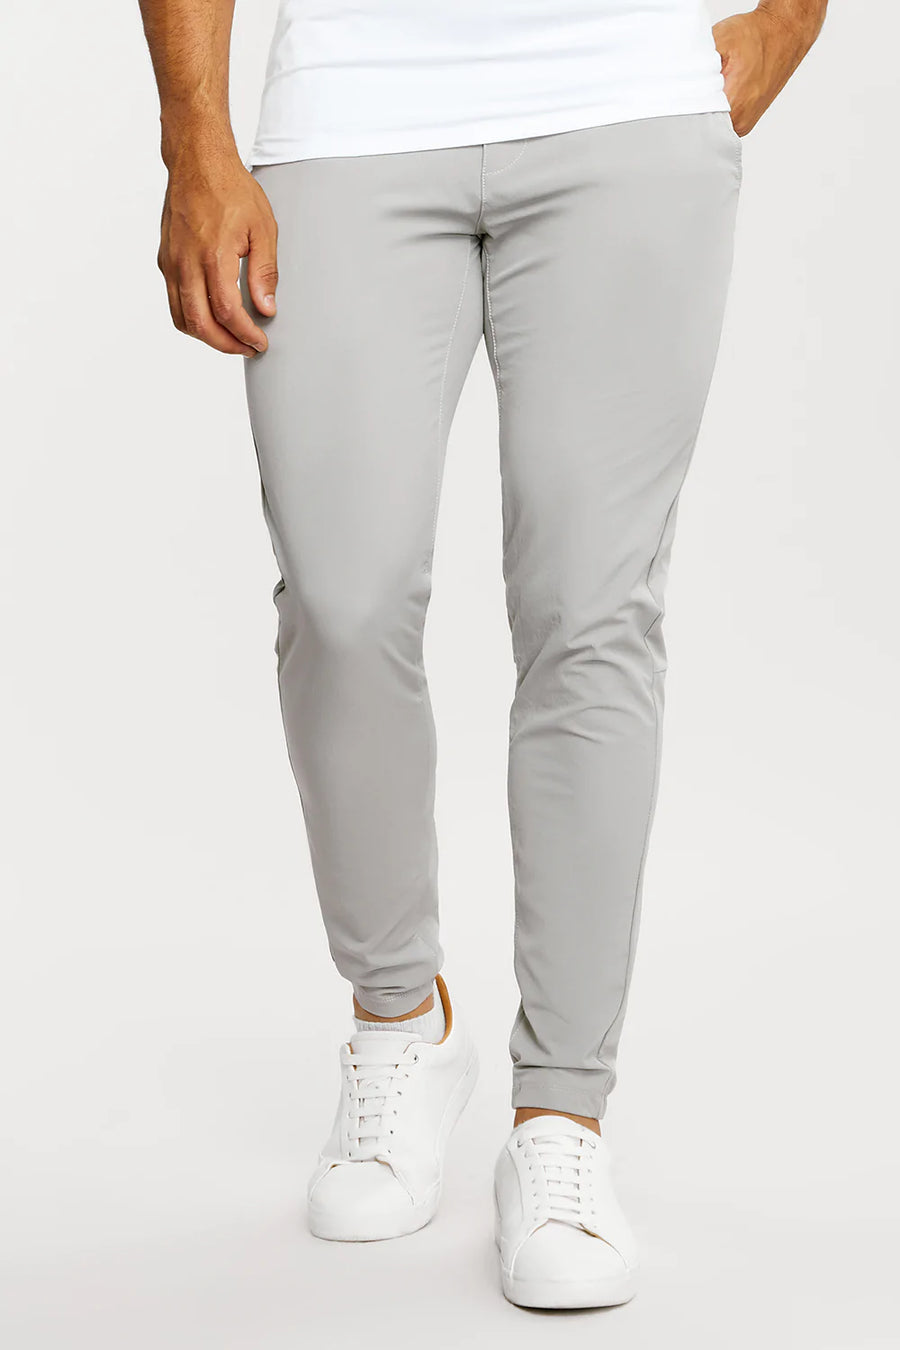 Muscle Fit Trousers - TAILORED ATHLETE